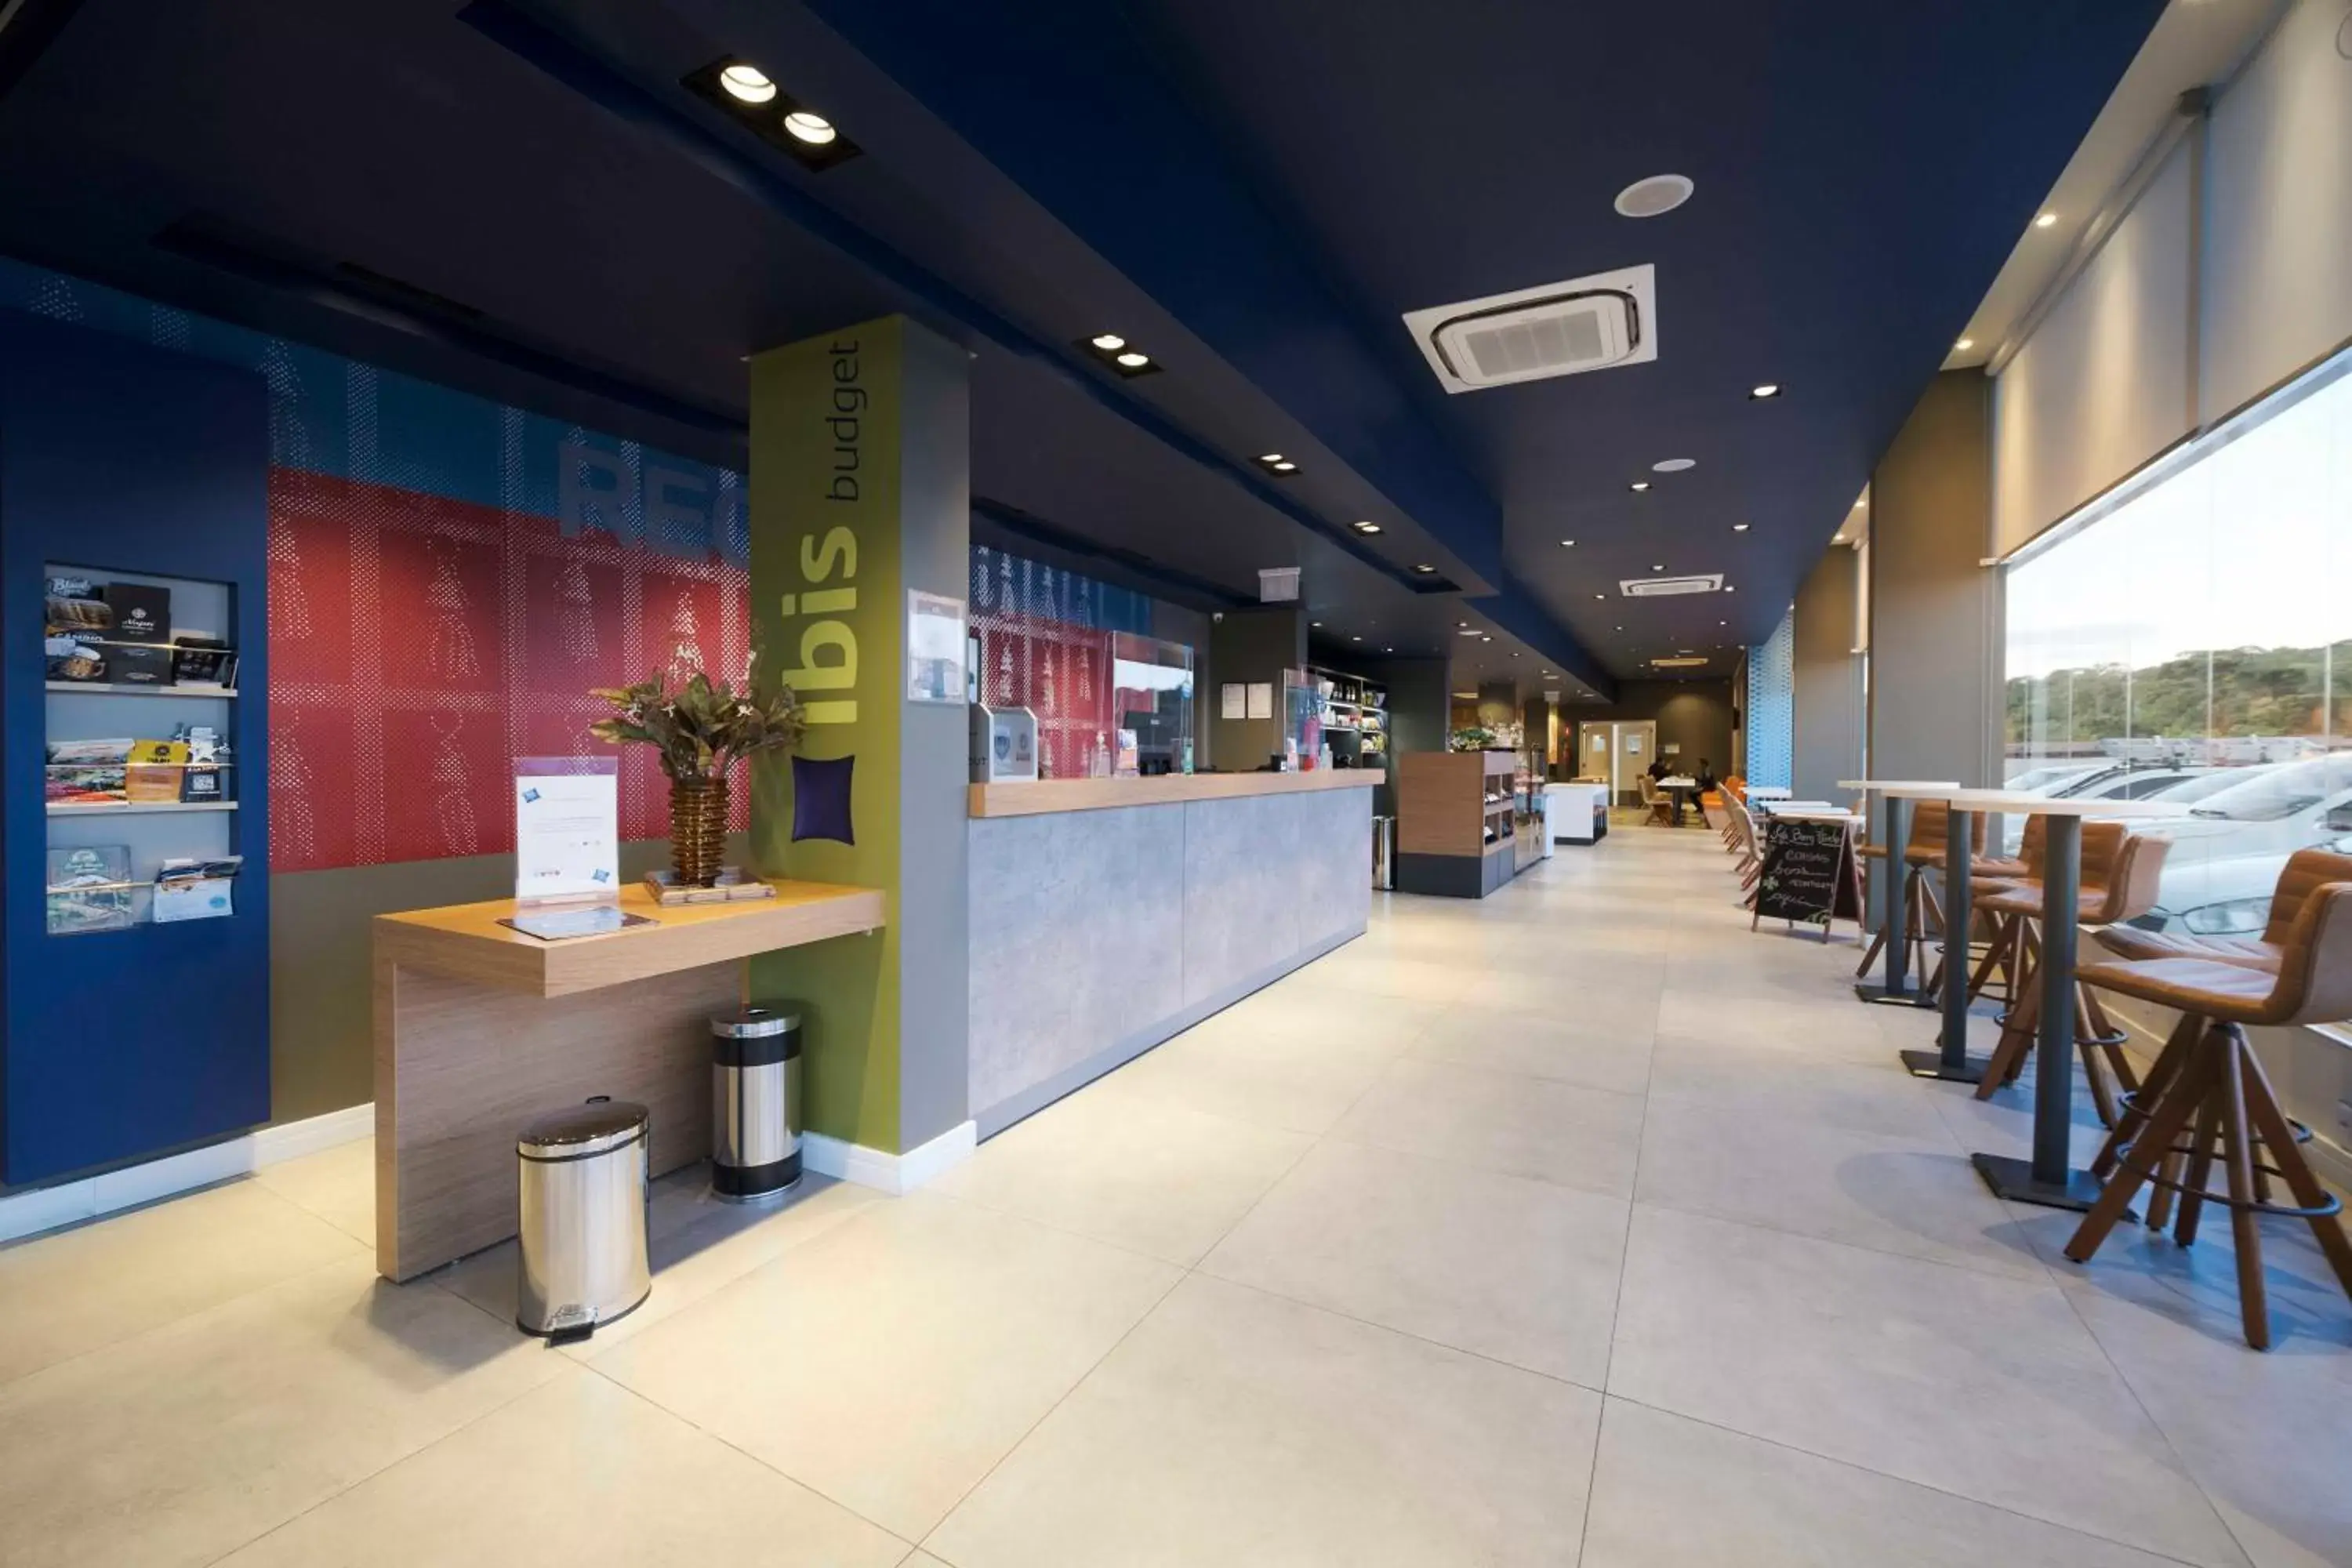 Lobby or reception in Ibis Budget Farroupilha